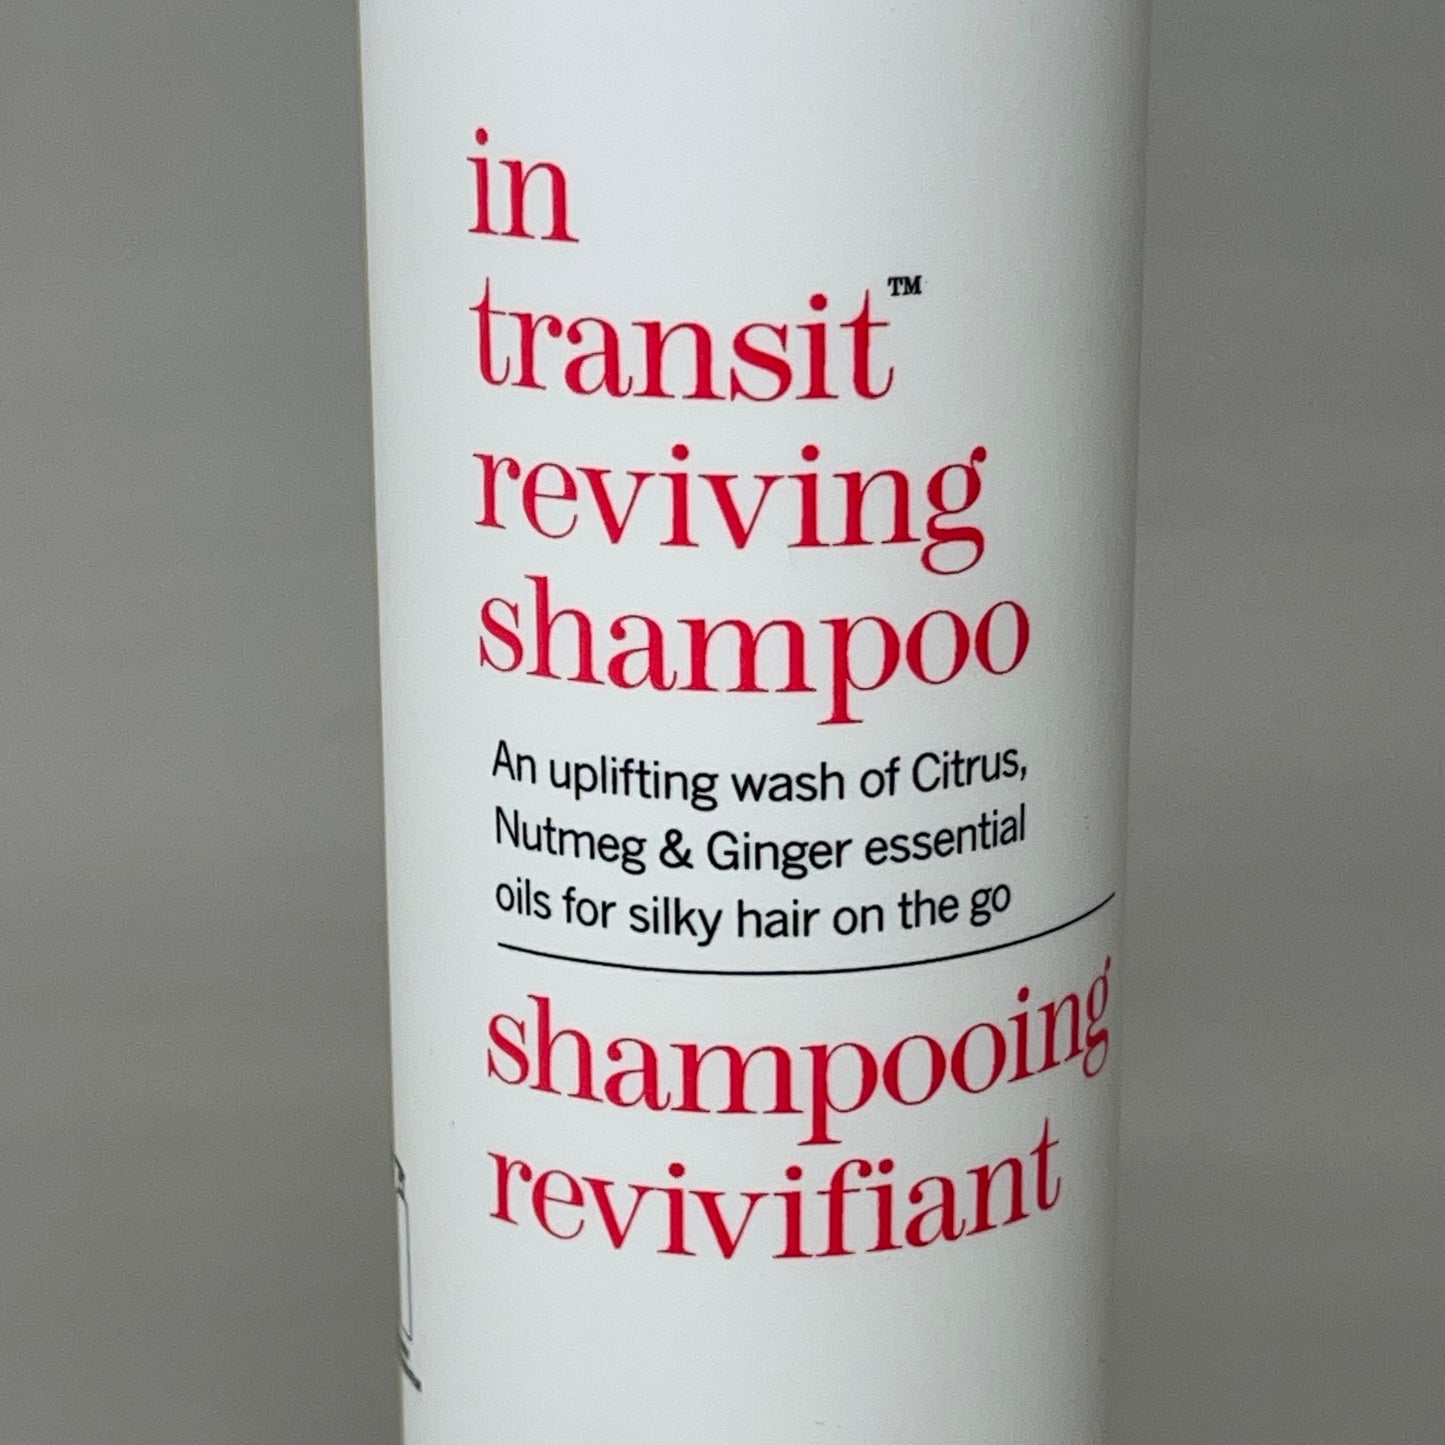 GILCHRIST & SOAMES 3 Pack Of THISWORKS In Transit Reviving Shampoo 12.2 Fl Oz (New)